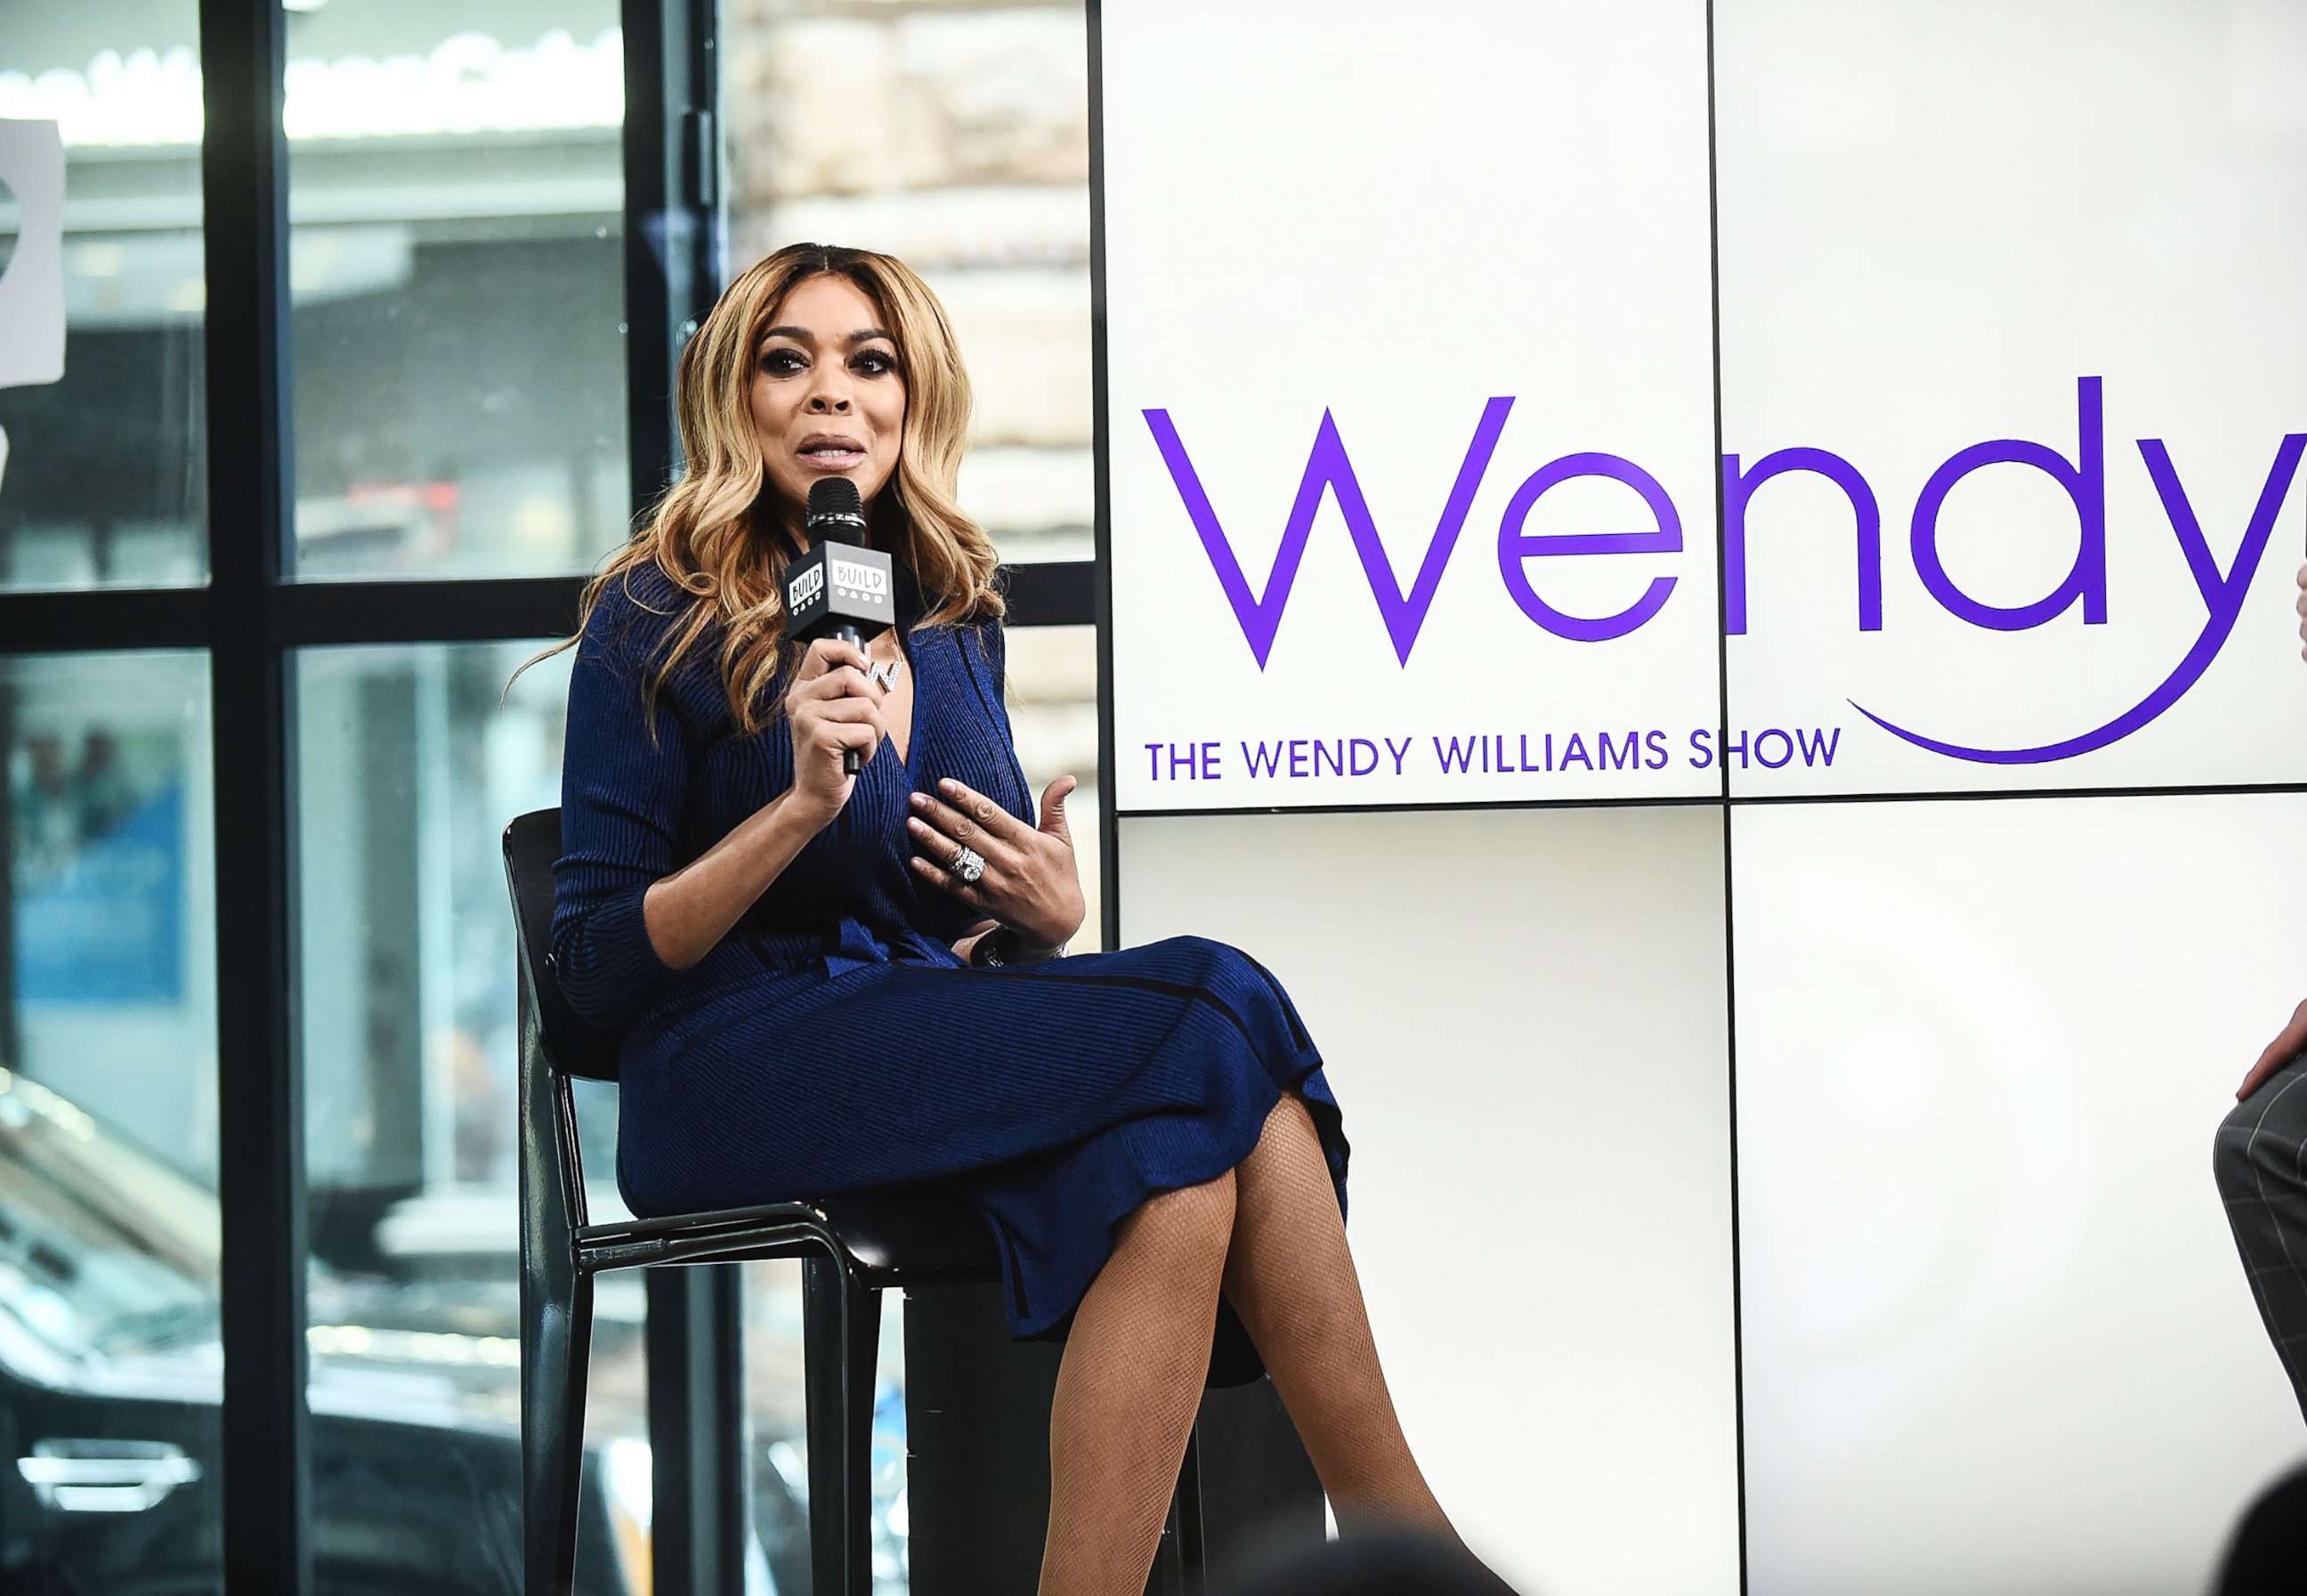 The Wendy Williams Show Videos at ABC News Video Archive at abcnews.com2592 x 1793